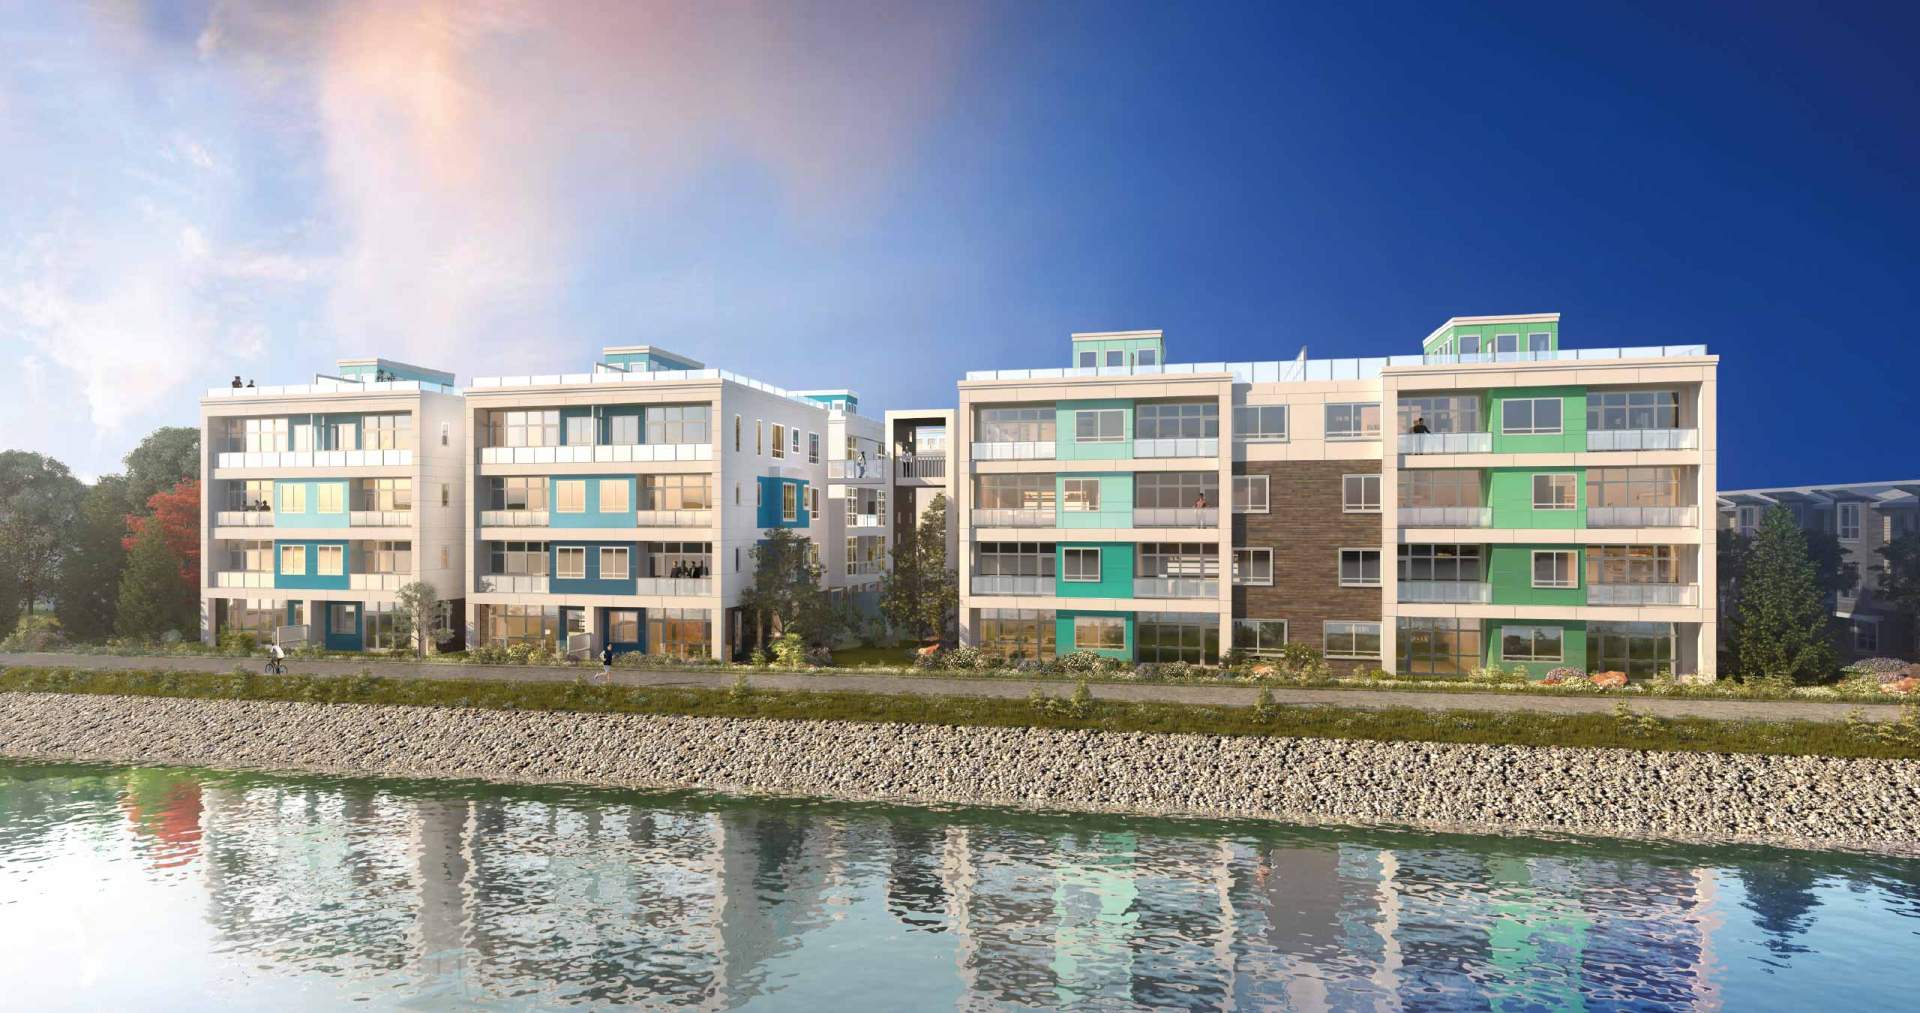 A collection of 80 riverfront Richmond townhomes coming soon to Bridgeport.